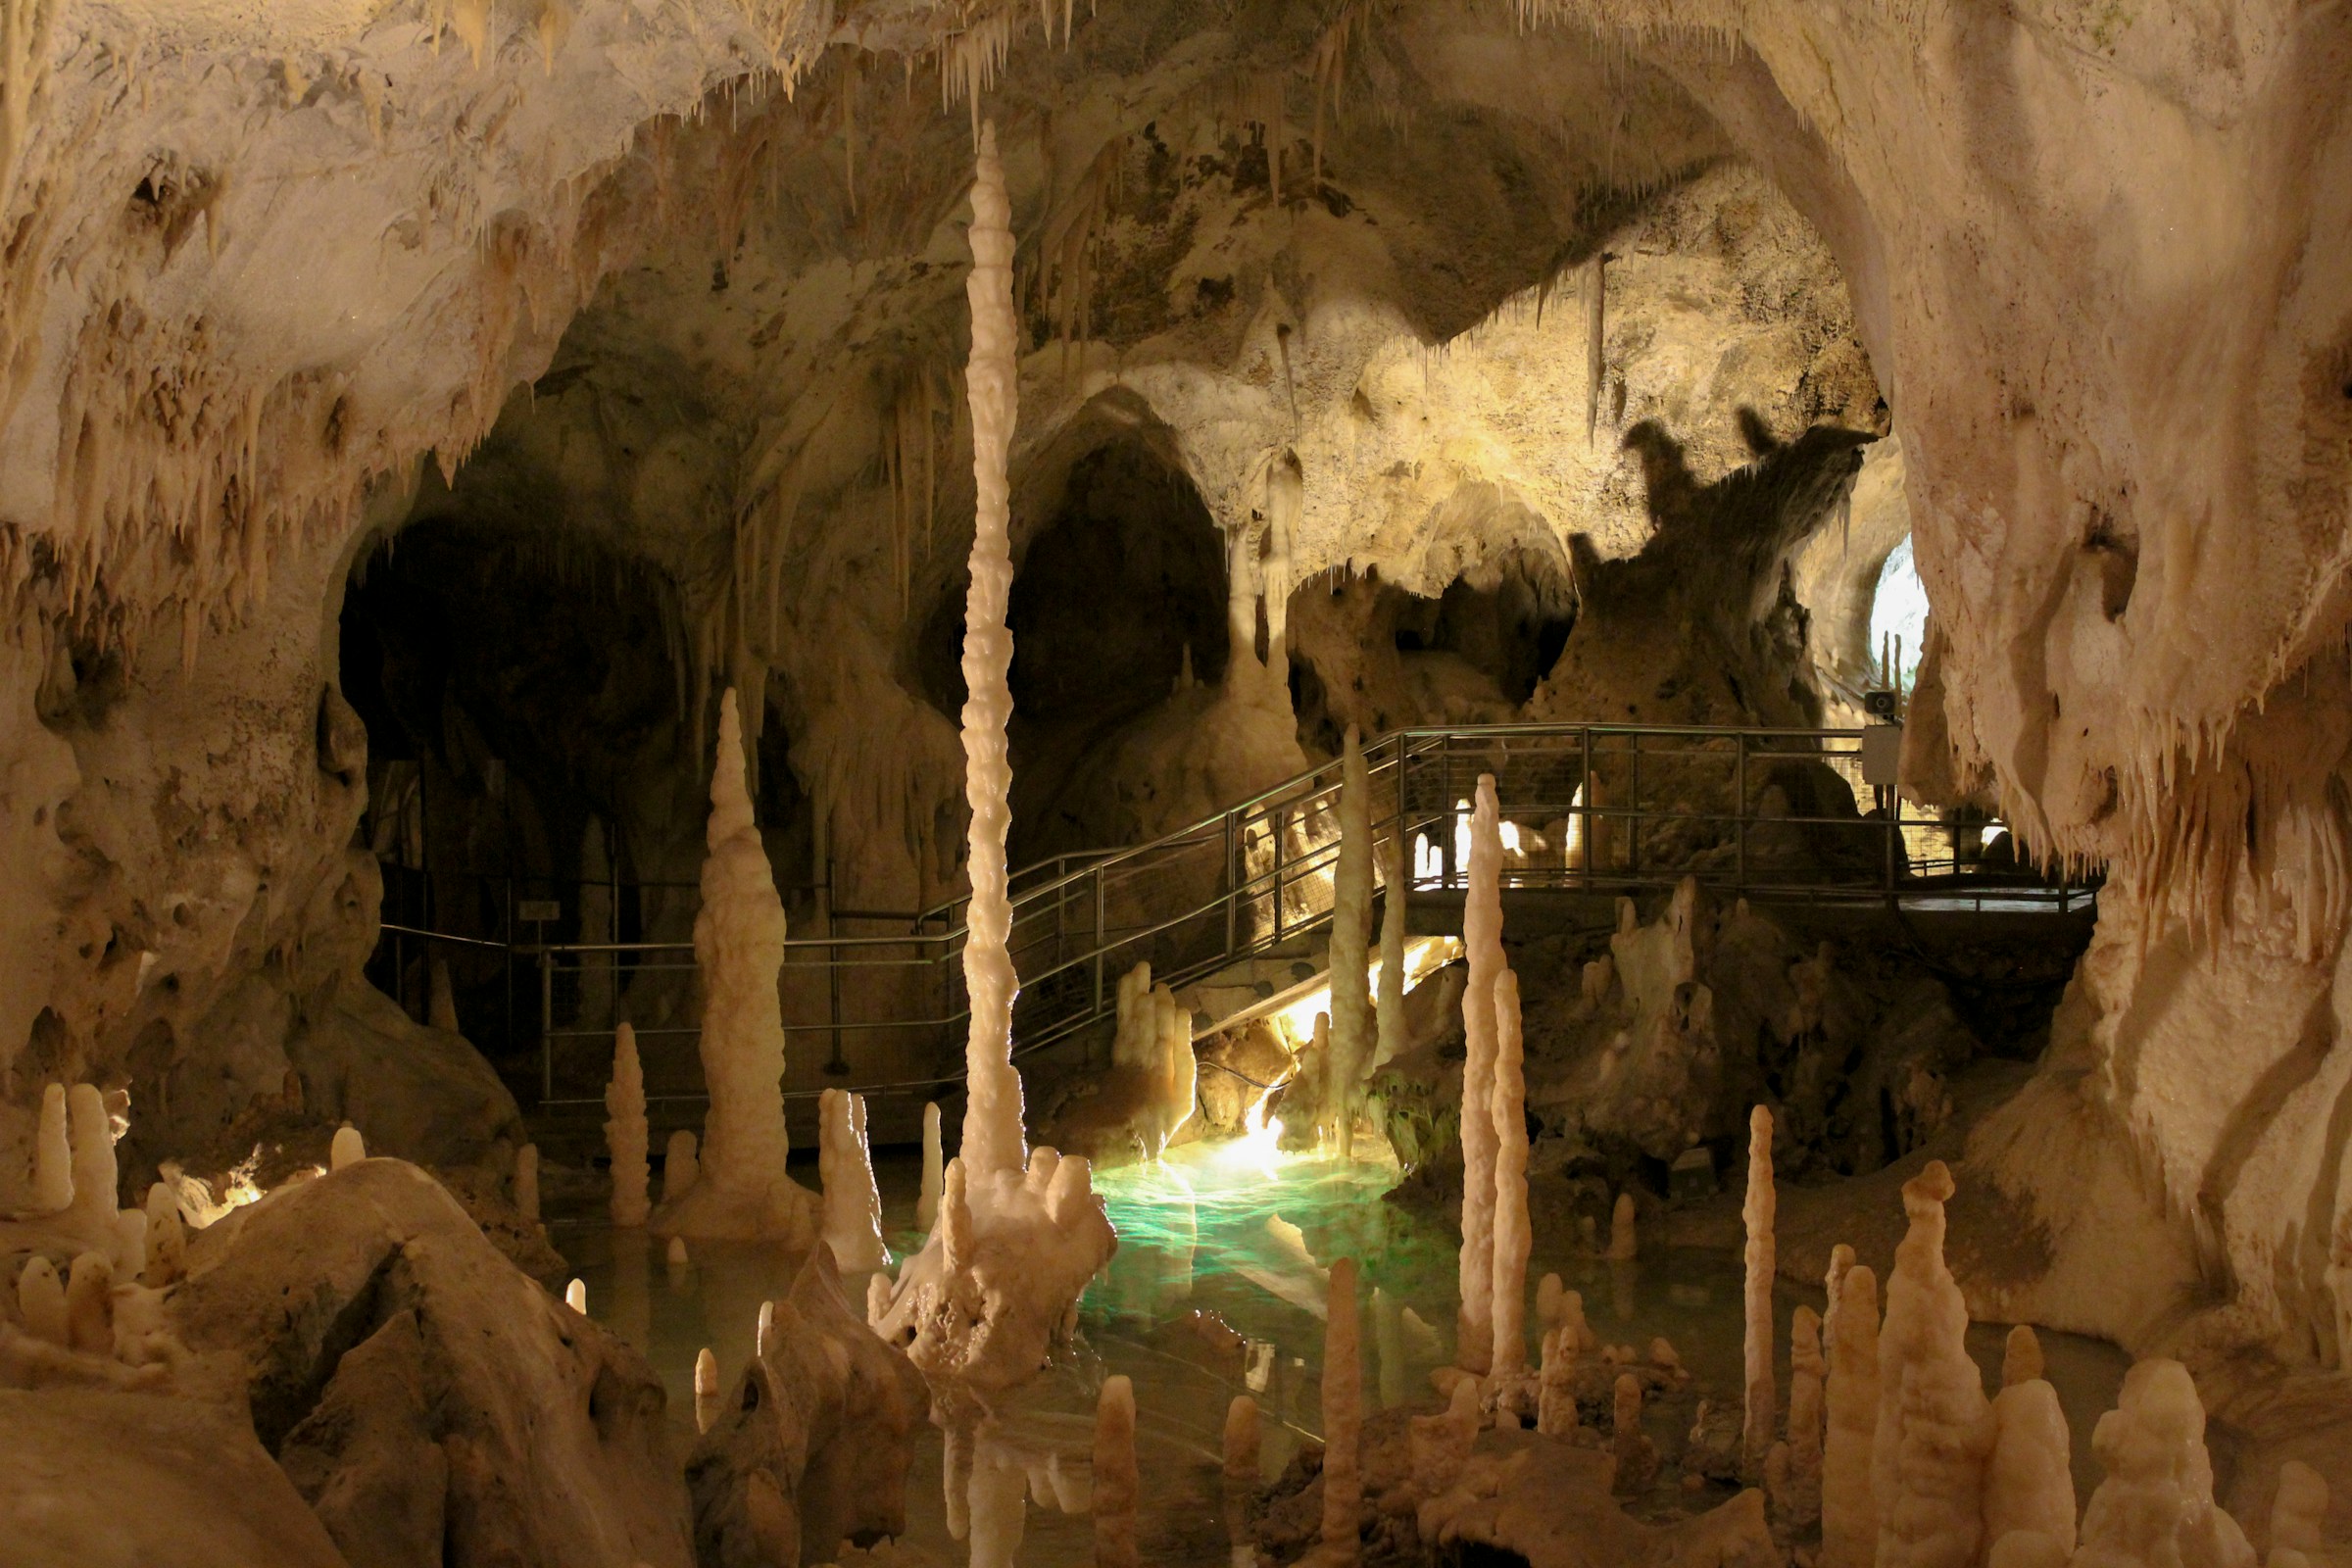 A tour of the Frasassi Caves